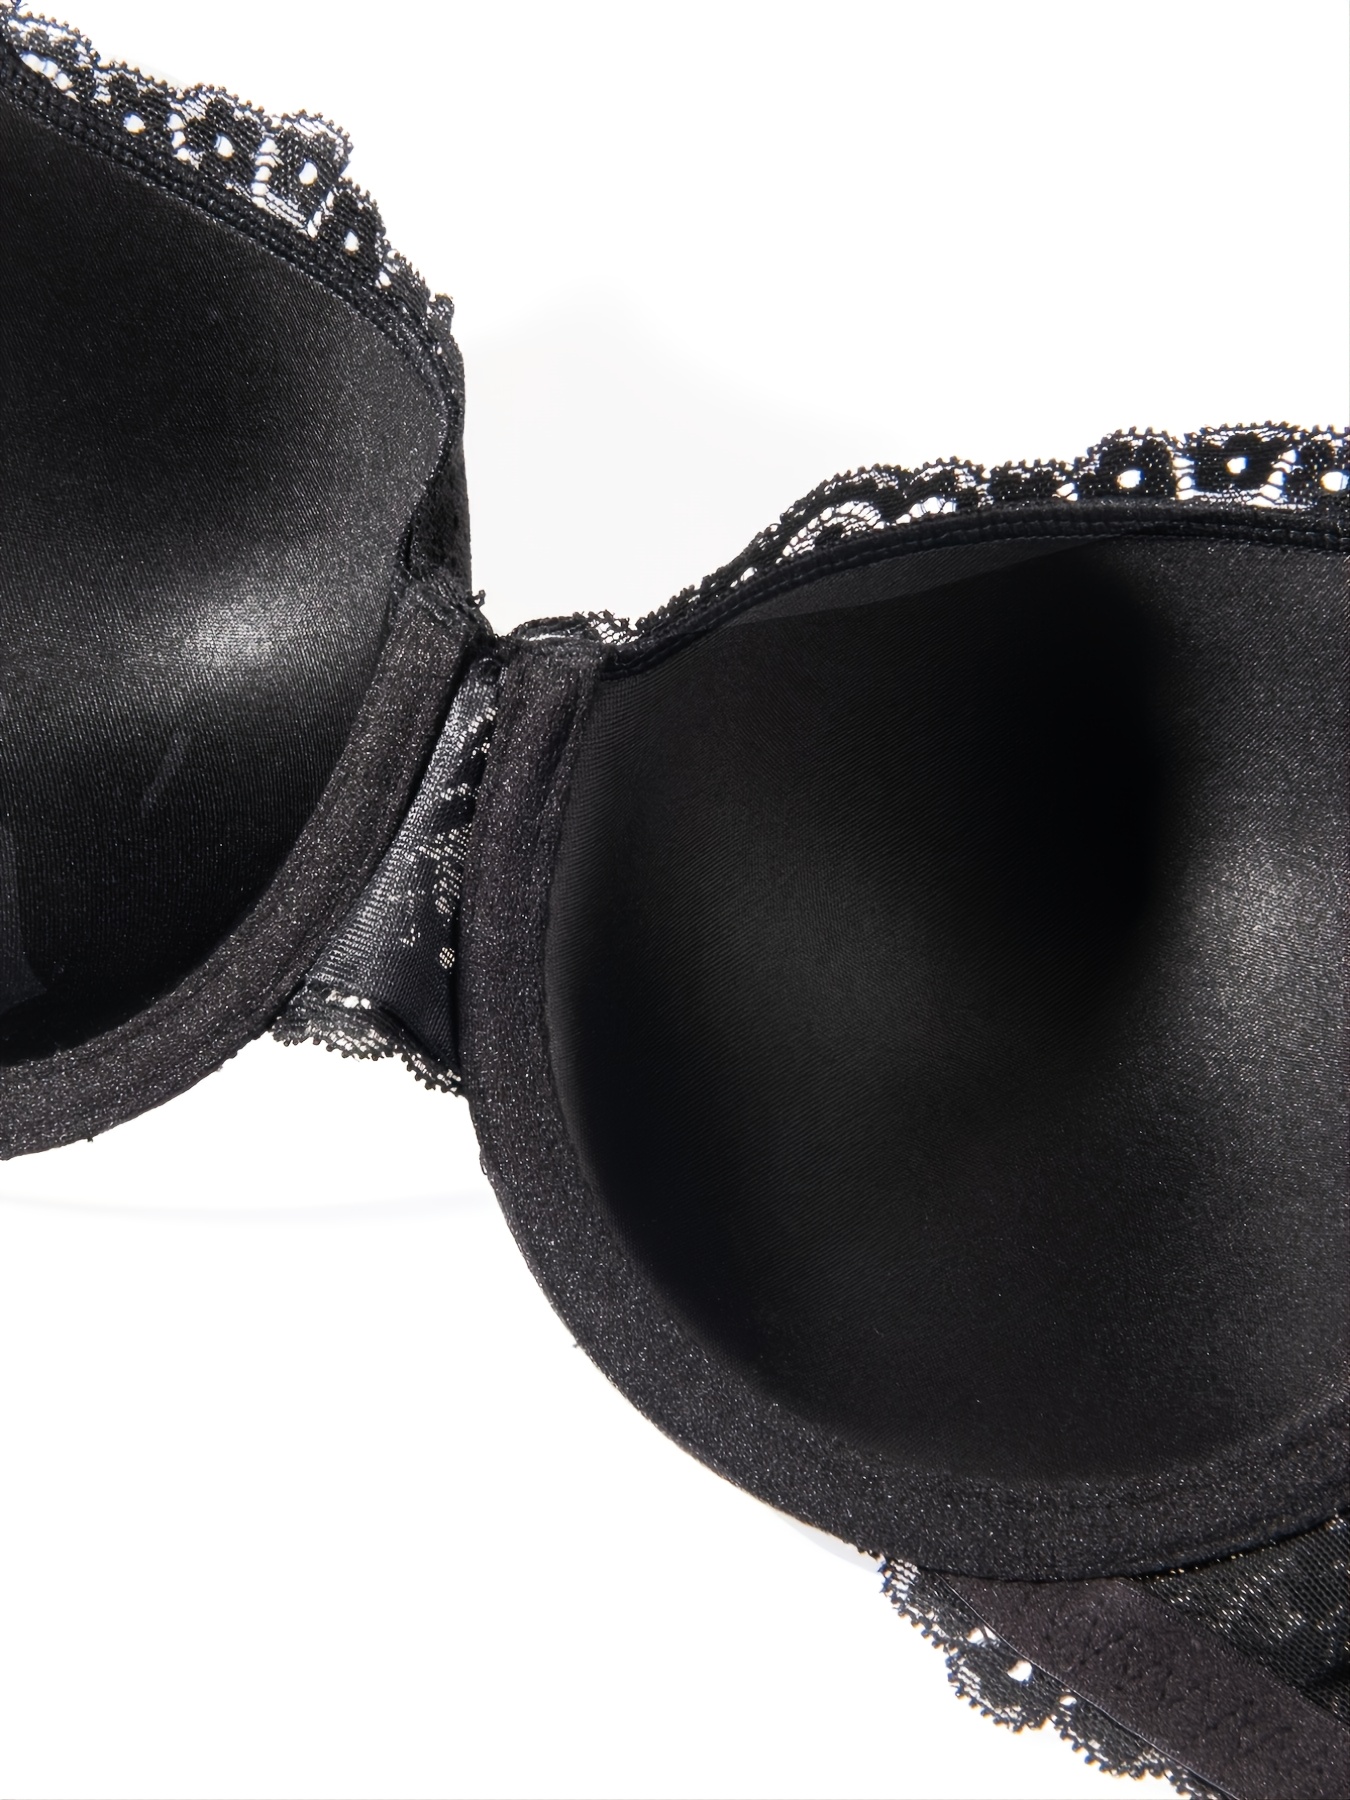 Buy Victoria's SecretVery Sexy Push Up Bra, Adds 1 Cup, Bras for